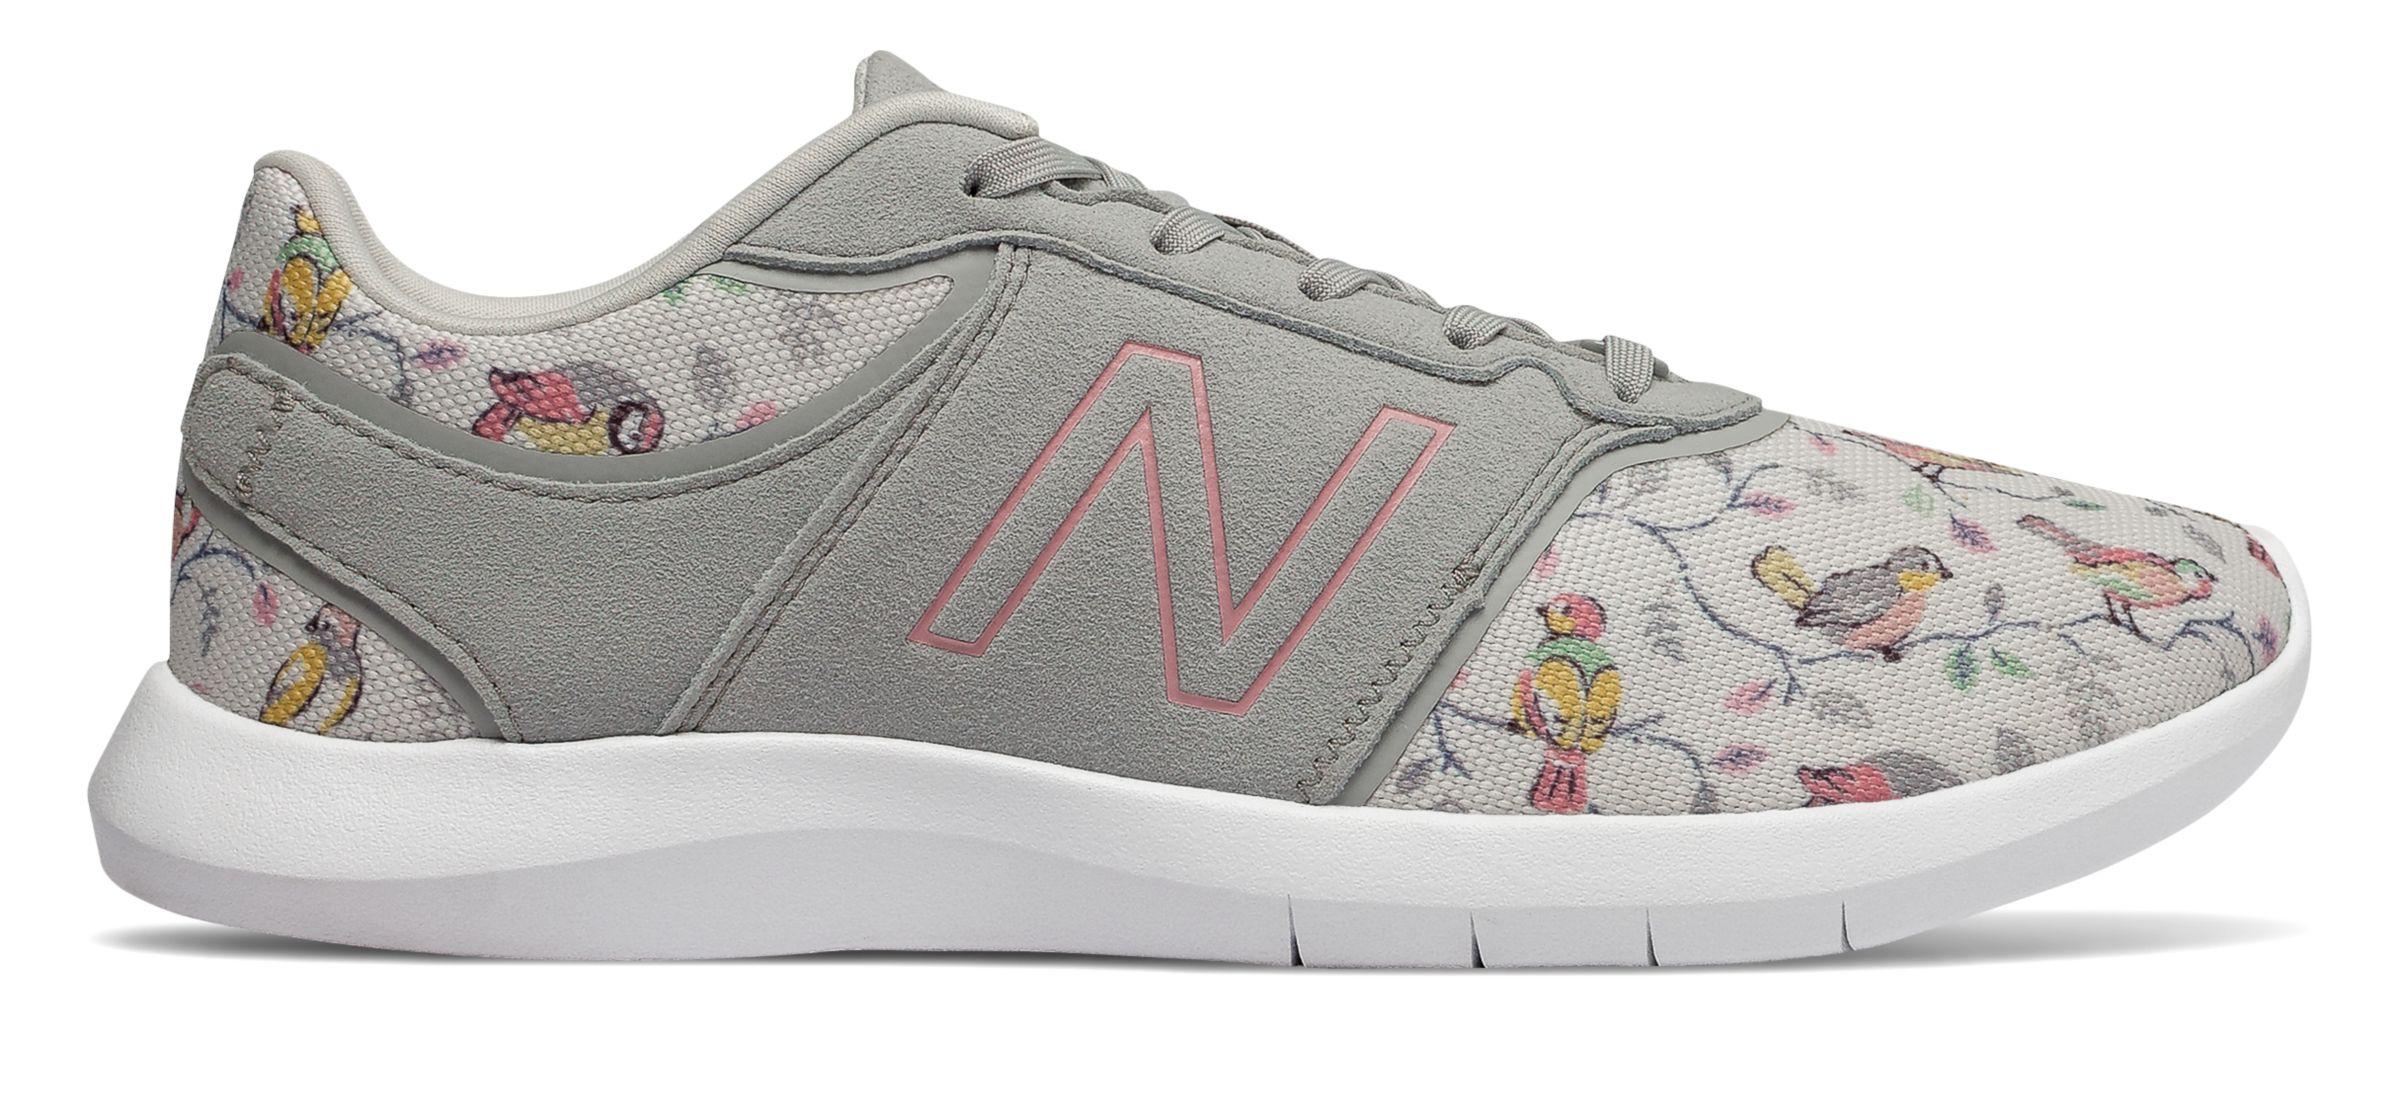 Cath Kidston Nb Trainers Outlet, 54% OFF | www.ingeniovirtual.com